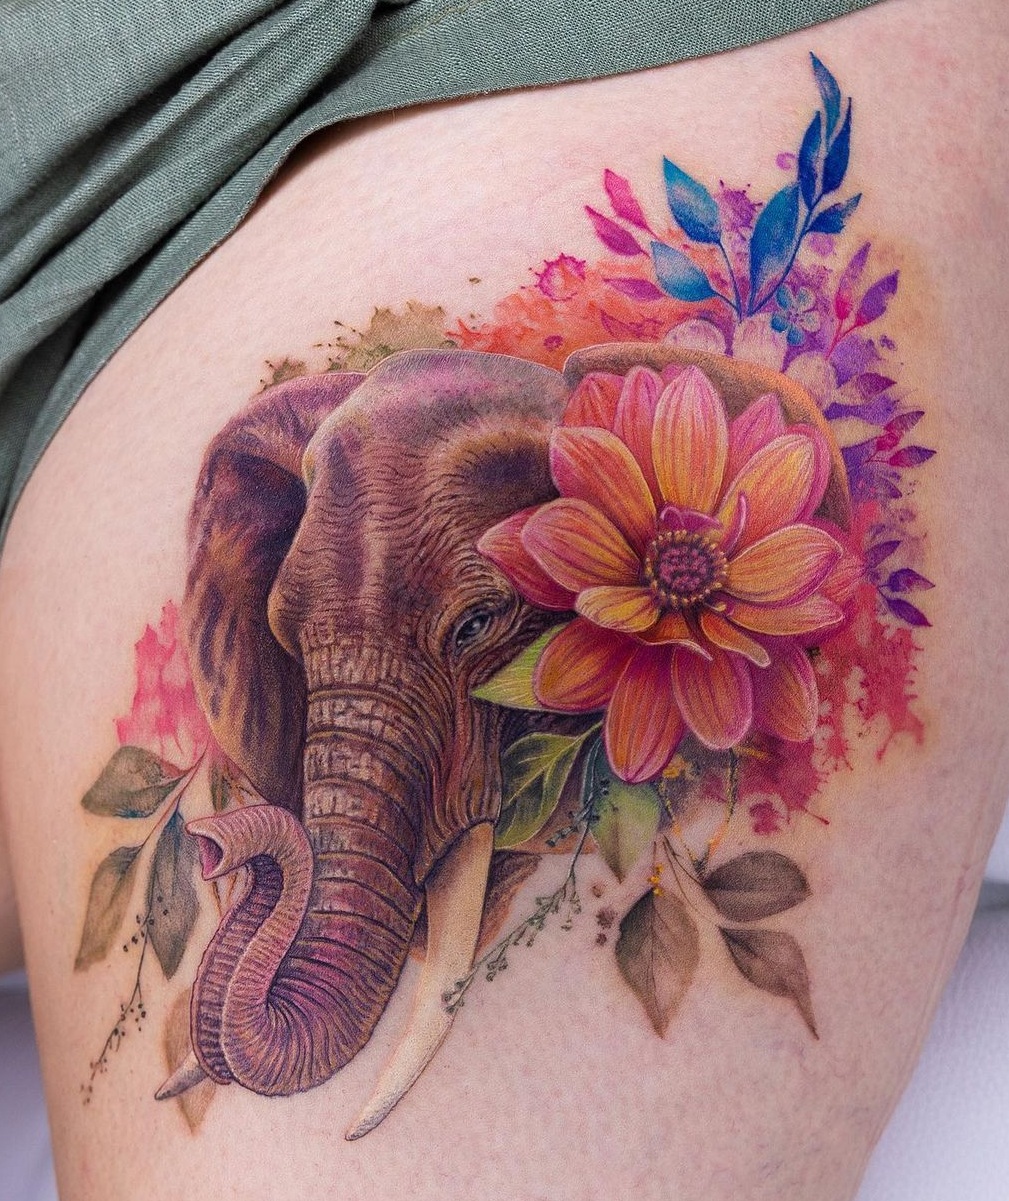 Elephant Tattoos: Meanings, Tattoo Ideas & Placement